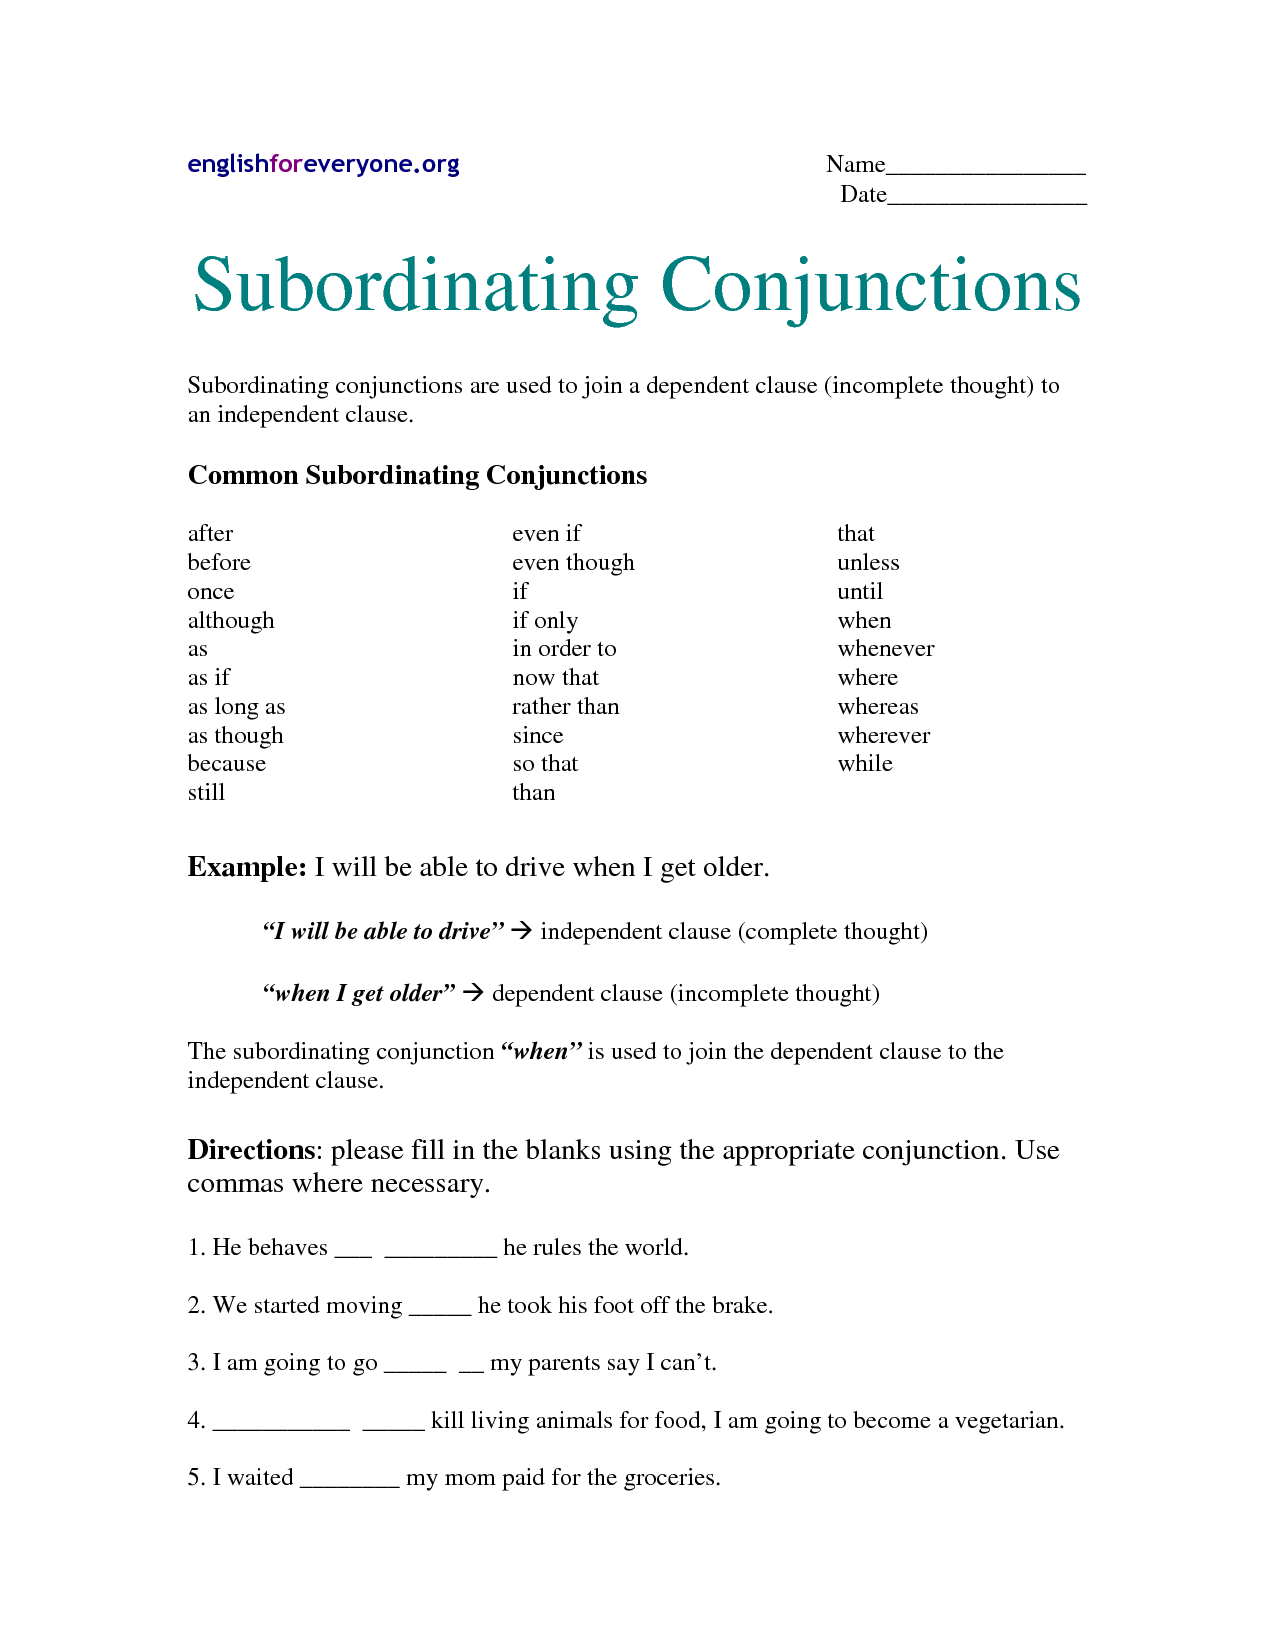 10-best-images-of-coordinating-conjunctions-worksheets-coordinating